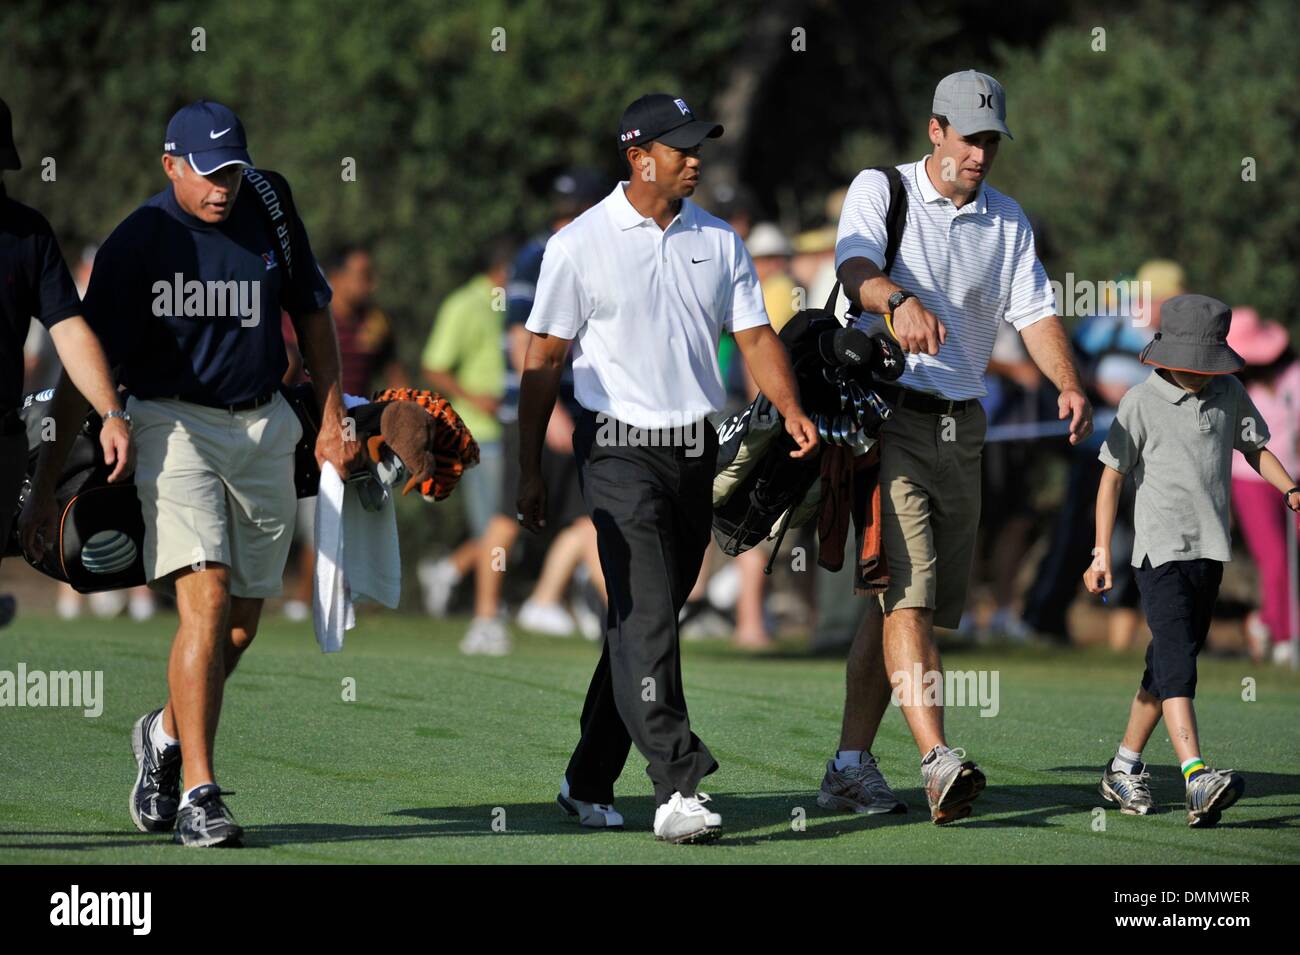 Nov 11, 2009 - Melbourne, Australia - (left to right) HANKY HANEY, TIGER WOODS, STUART GALE and SAM put the right foot forward down the fourth fairway during the Pro-AM at Kingston Heath Golf Club. (Credit Image: Â© Matthew Mallett/ZUMA Press) Stock Photo